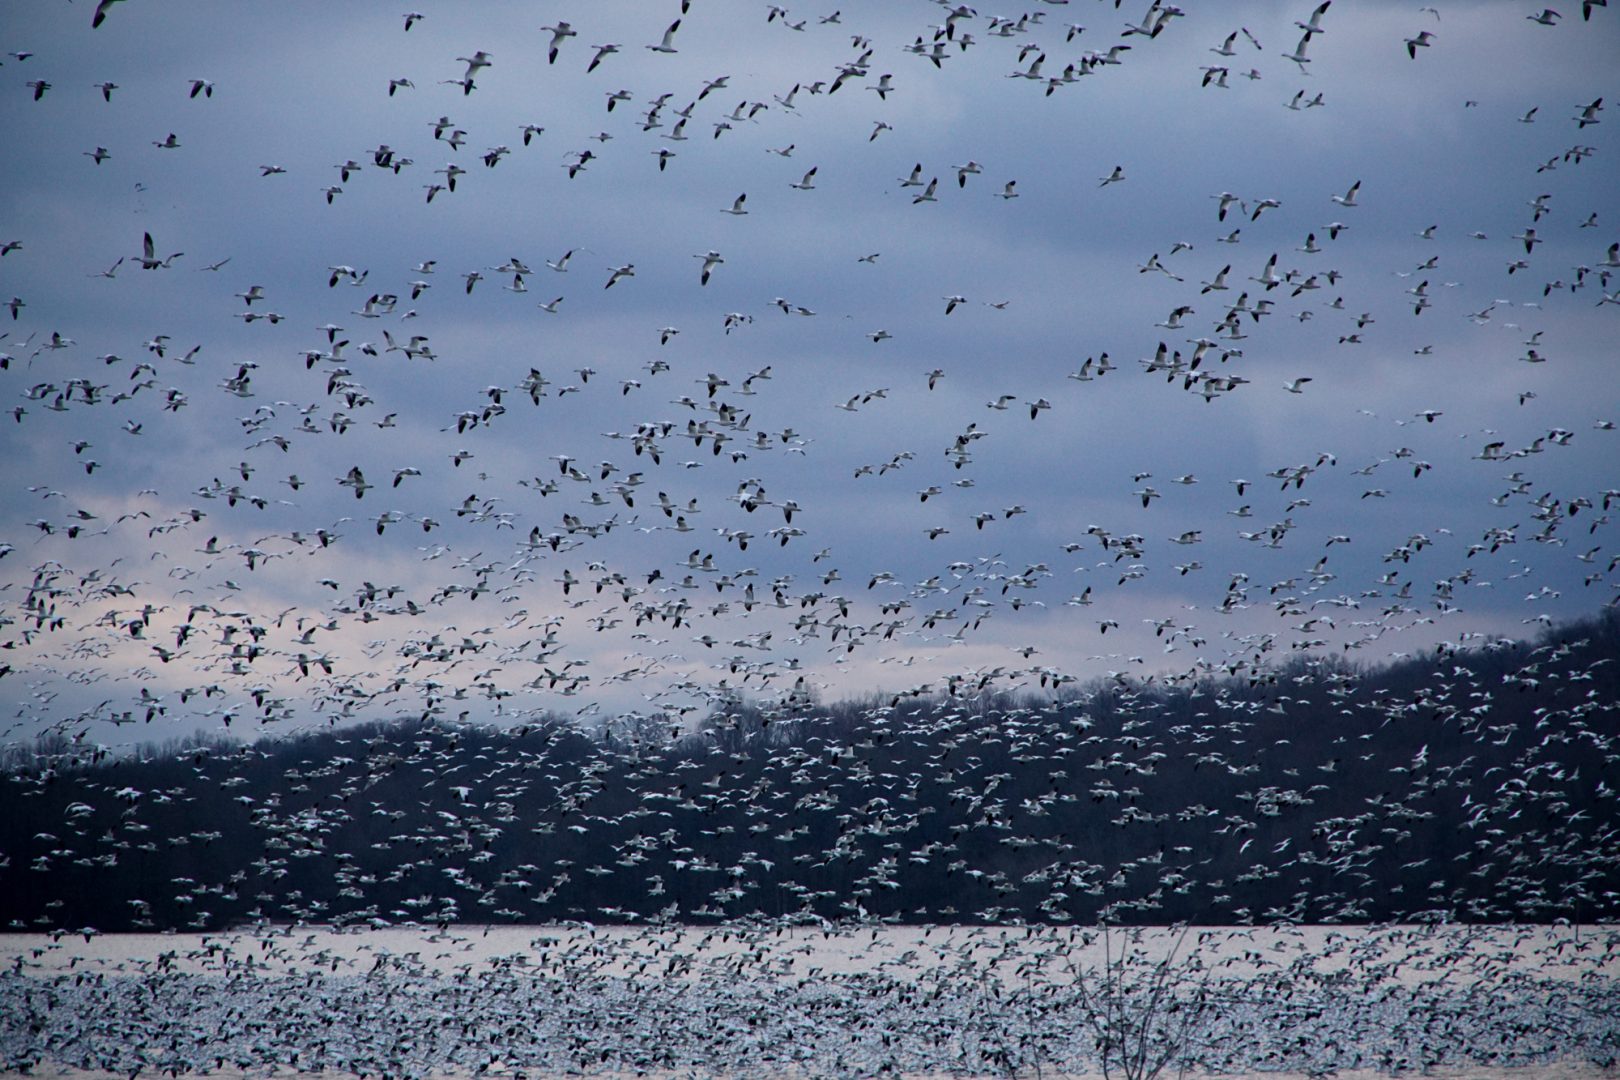 The annual snow geese migration at Middle Creek Wildlife Management Area on March 3, 2022